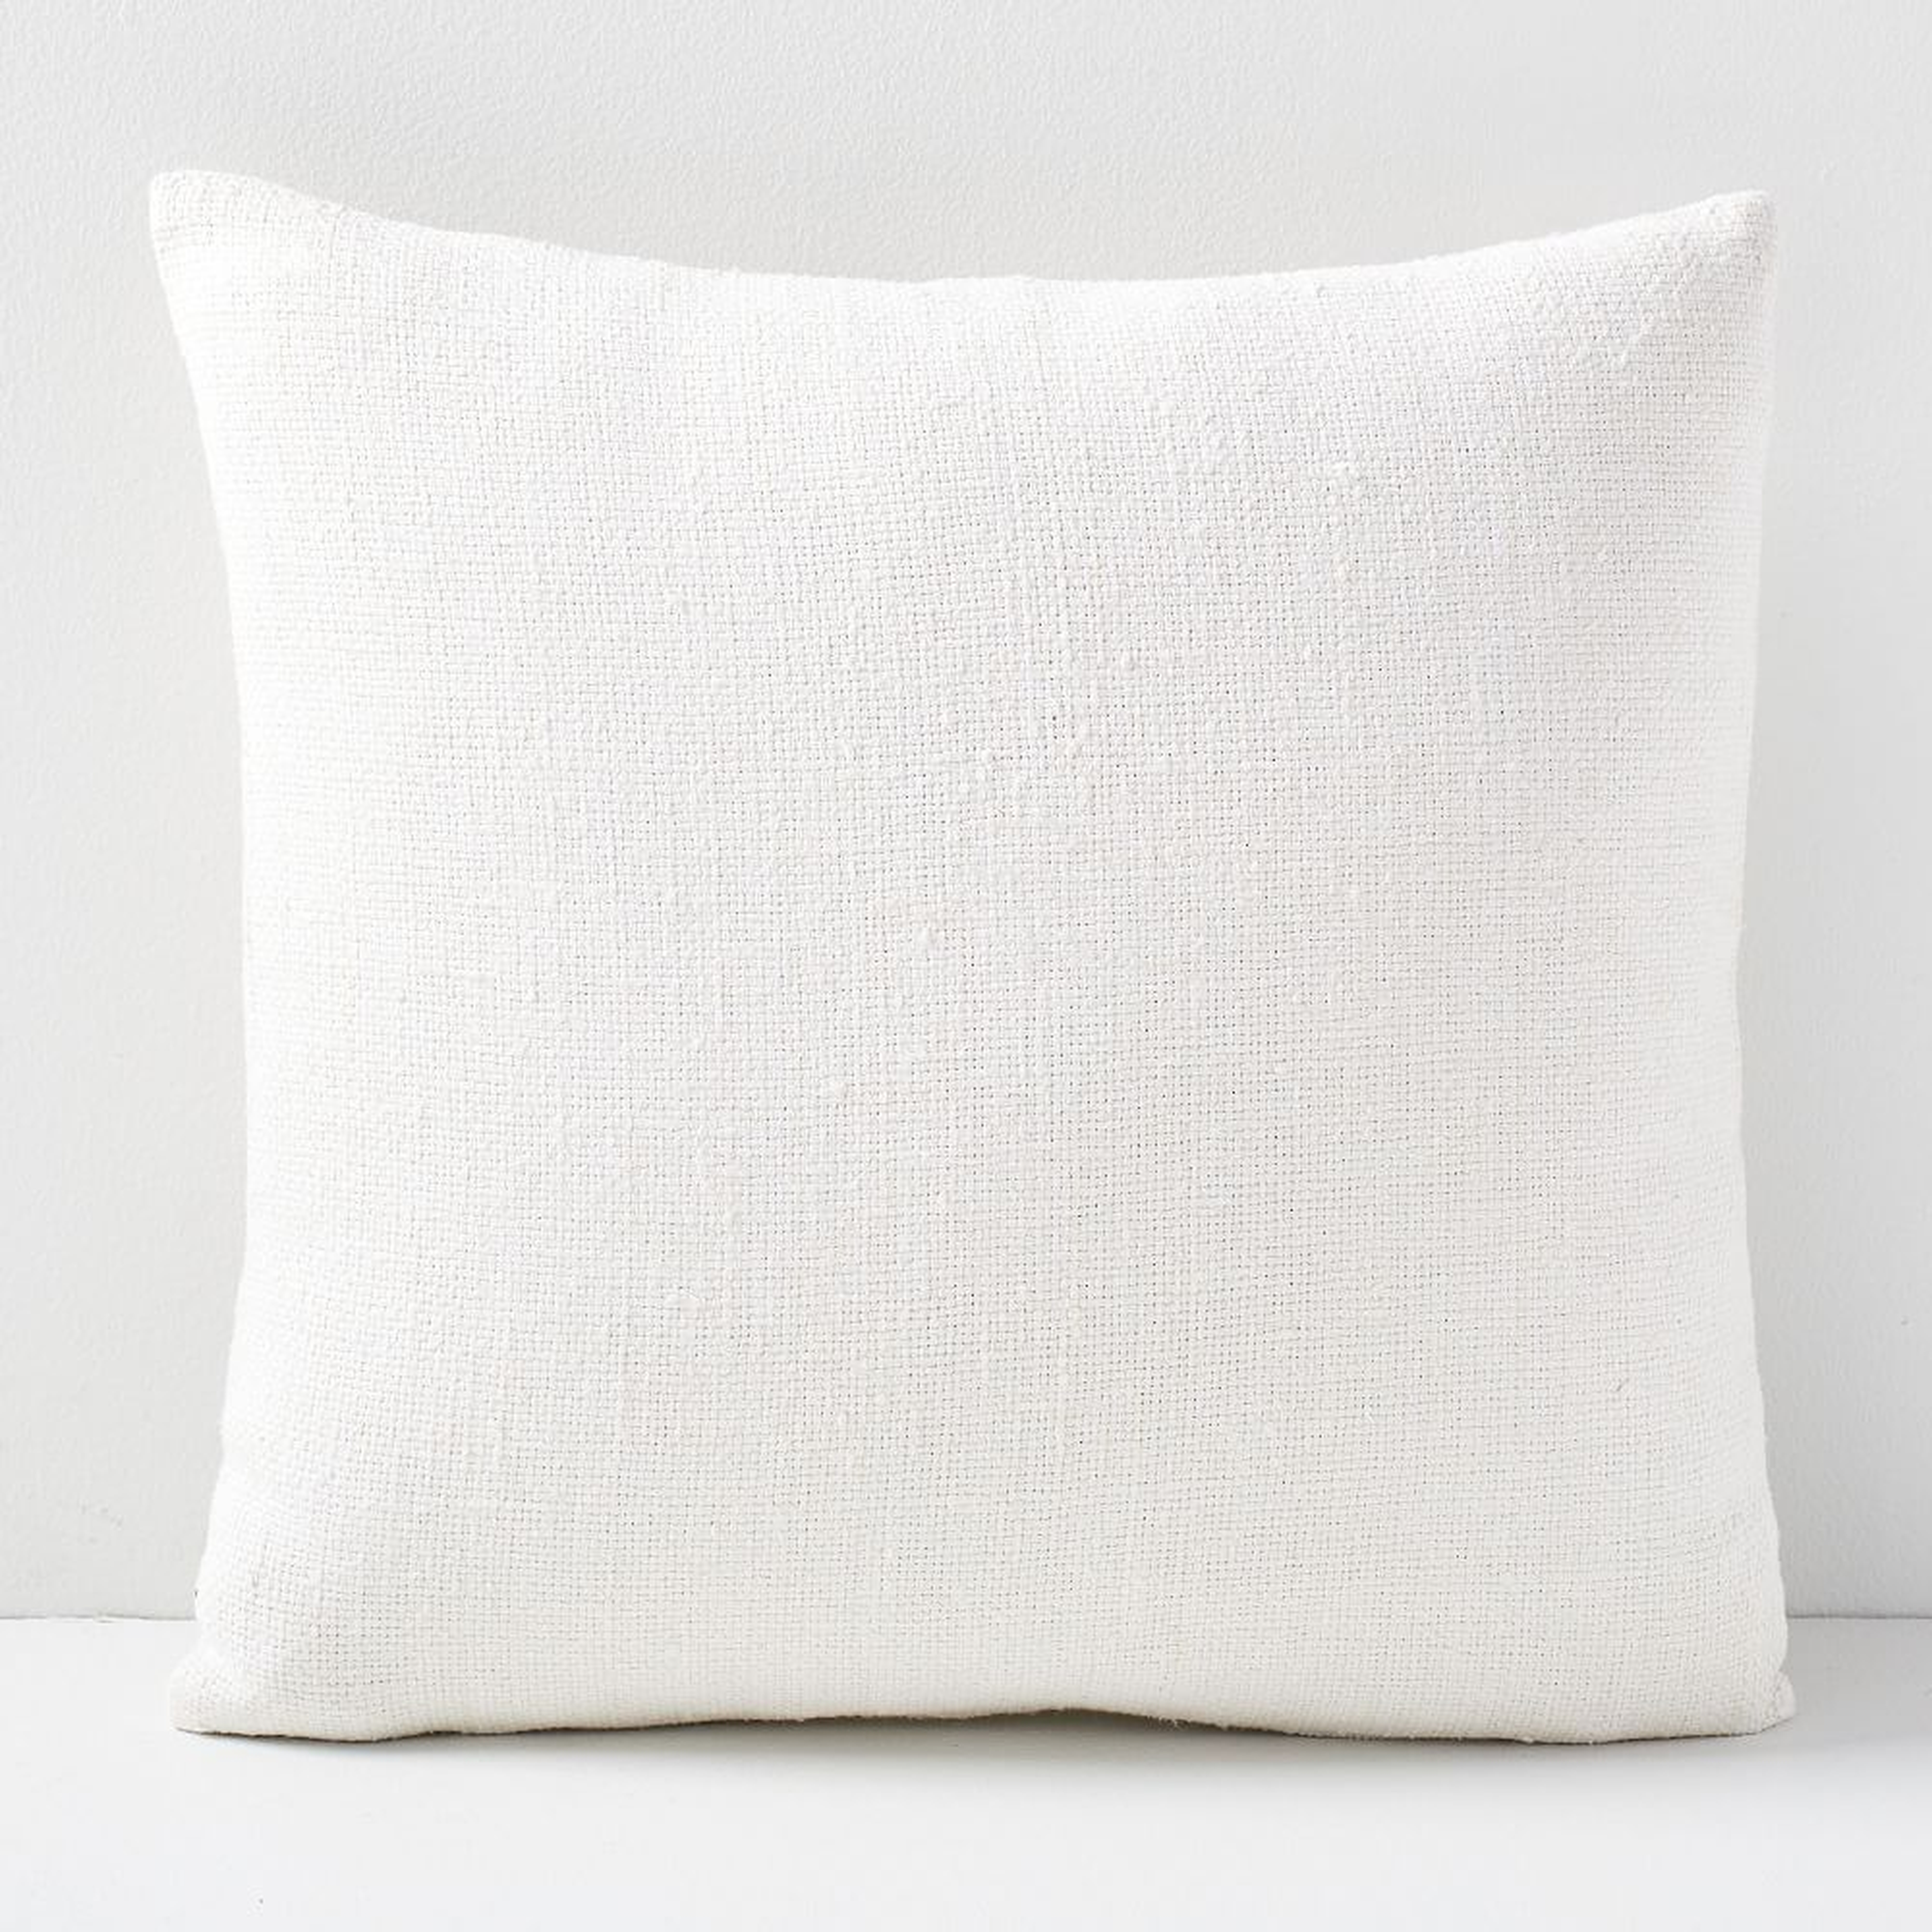 Silk Hand-Loomed Pillow Cover, 20"x20", White, Set of 2 - West Elm